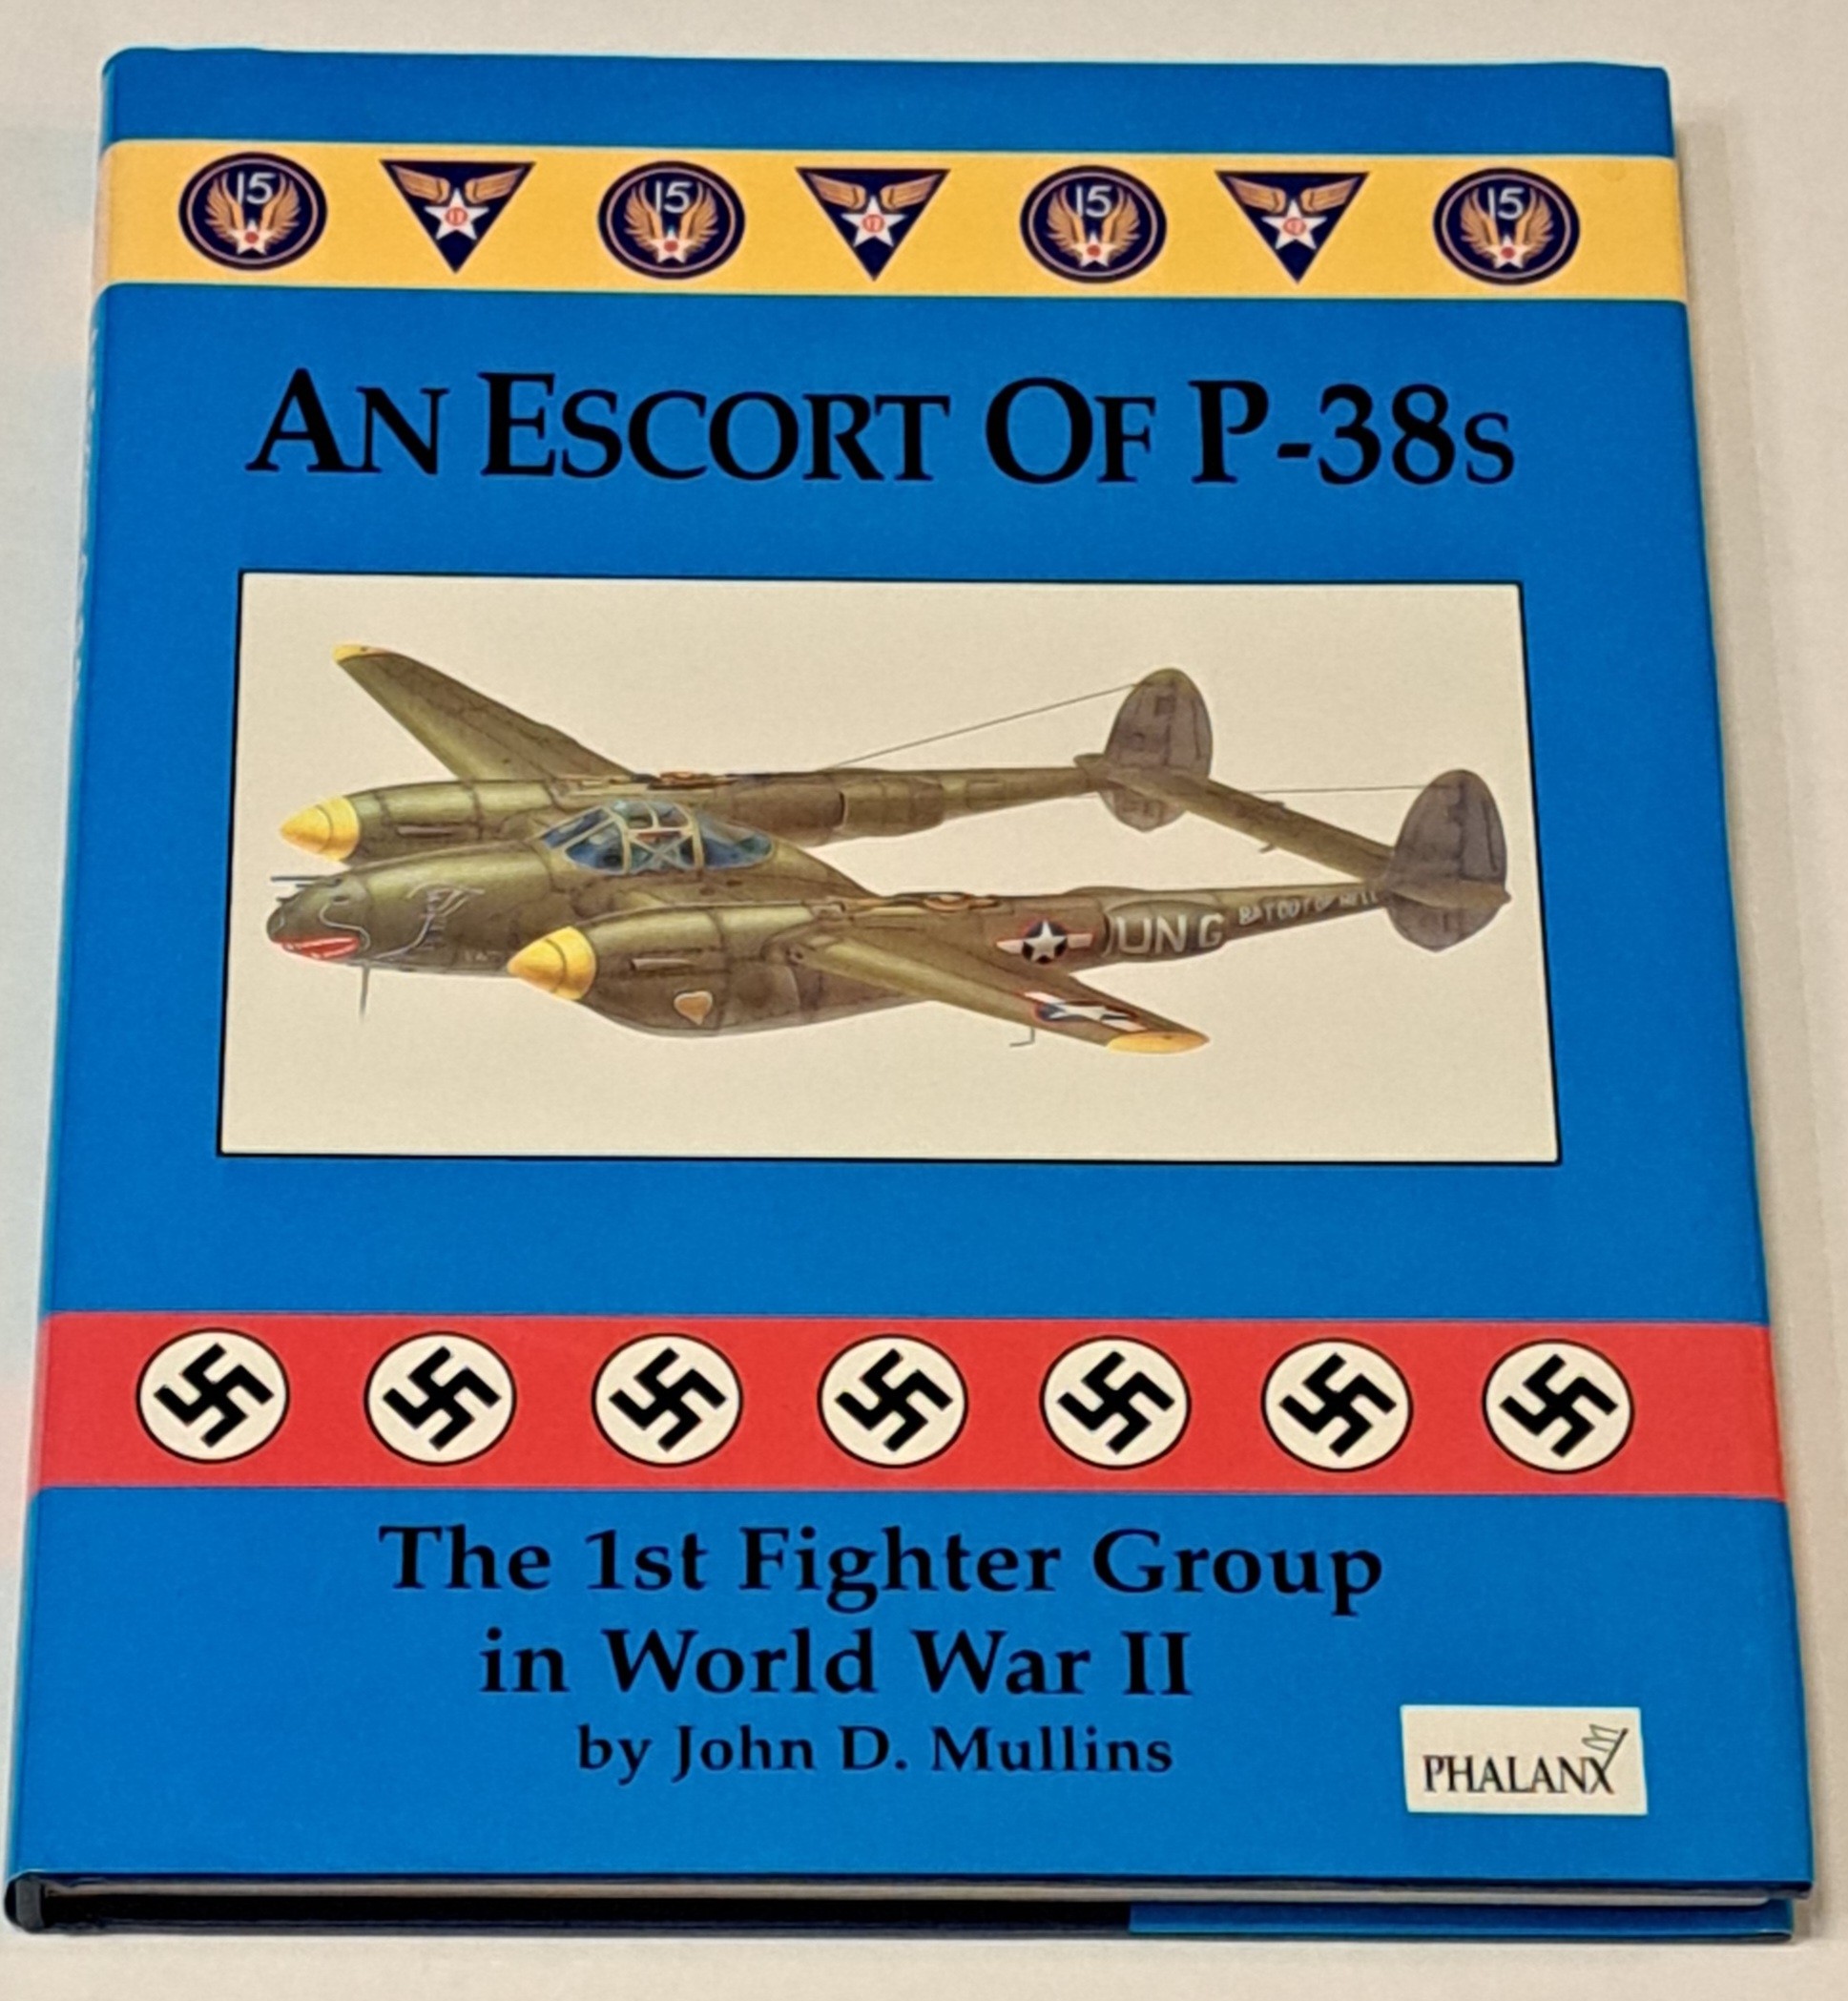 An Escort of P-38s: The 1st Fighter Group in WWII